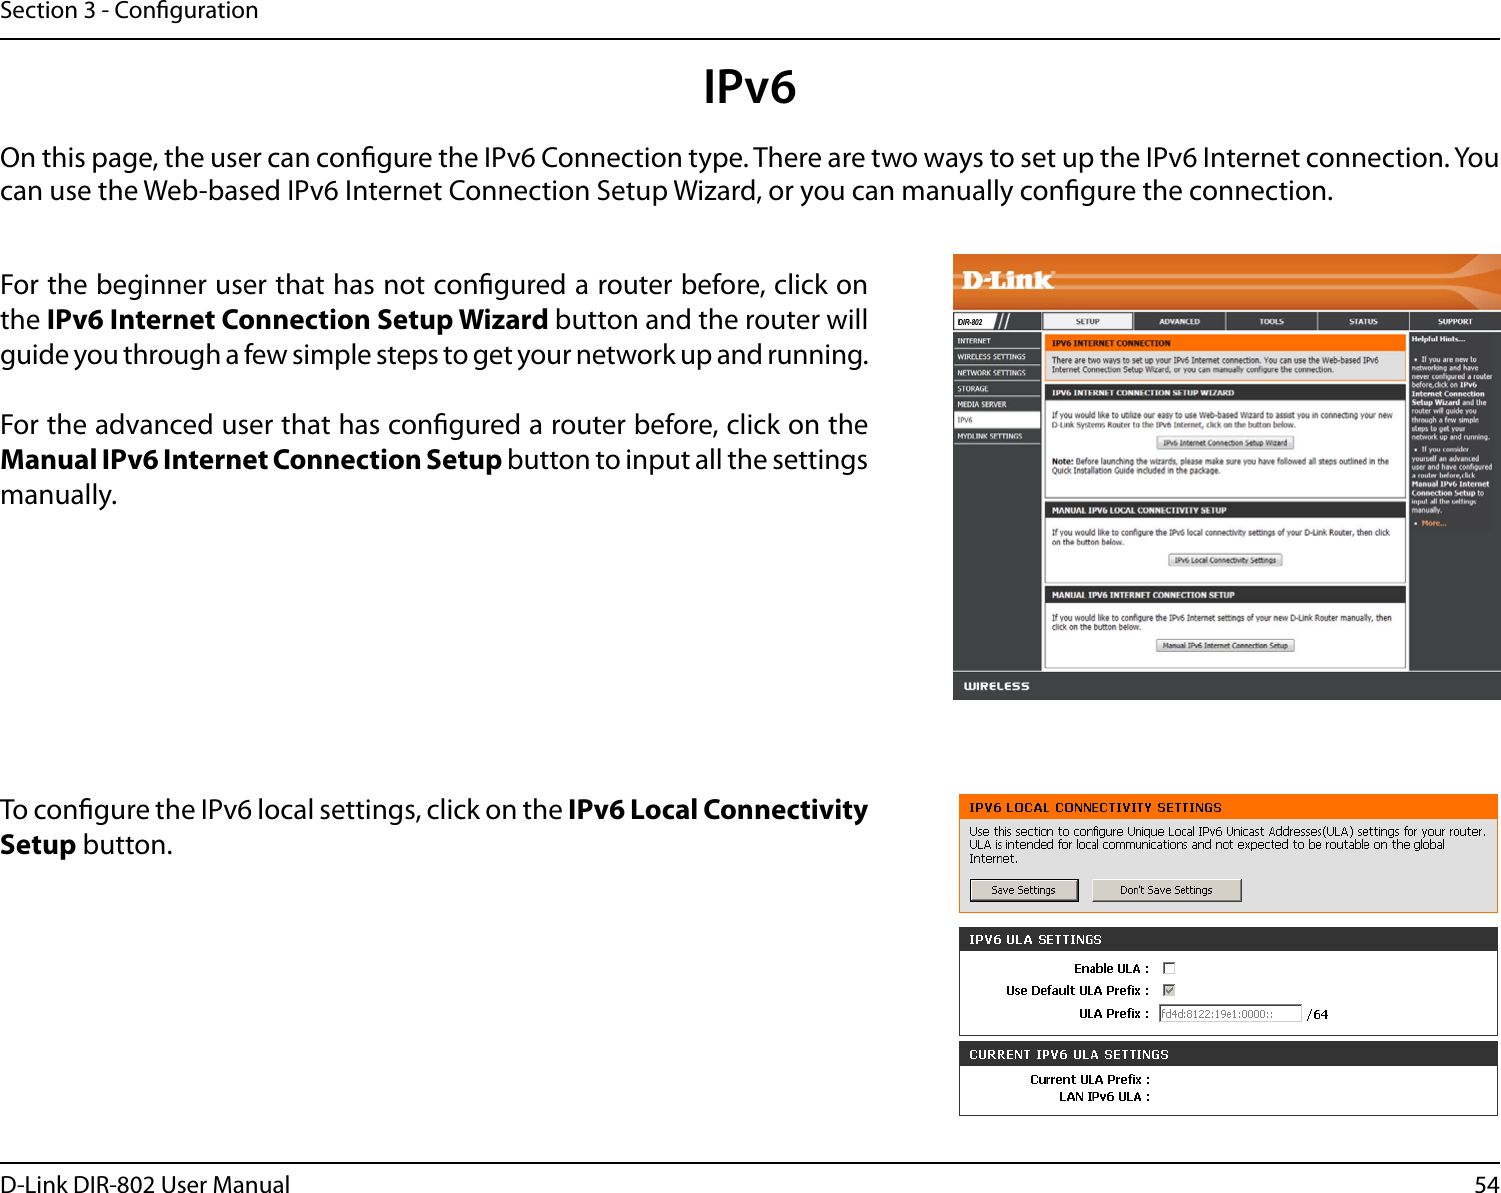 54D-Link DIR-802 User ManualSection 3 - CongurationIPv6On this page, the user can congure the IPv6 Connection type. There are two ways to set up the IPv6 Internet connection. You can use the Web-based IPv6 Internet Connection Setup Wizard, or you can manually congure the connection.For the beginner user that has not congured a router before, click on the IPv6 Internet Connection Setup Wizard button and the router will guide you through a few simple steps to get your network up and running.For the advanced user that has congured a router before, click on the Manual IPv6 Internet Connection Setup button to input all the settings manually.To congure the IPv6 local settings, click on the IPv6 Local Connectivity Setup button.DIR-802